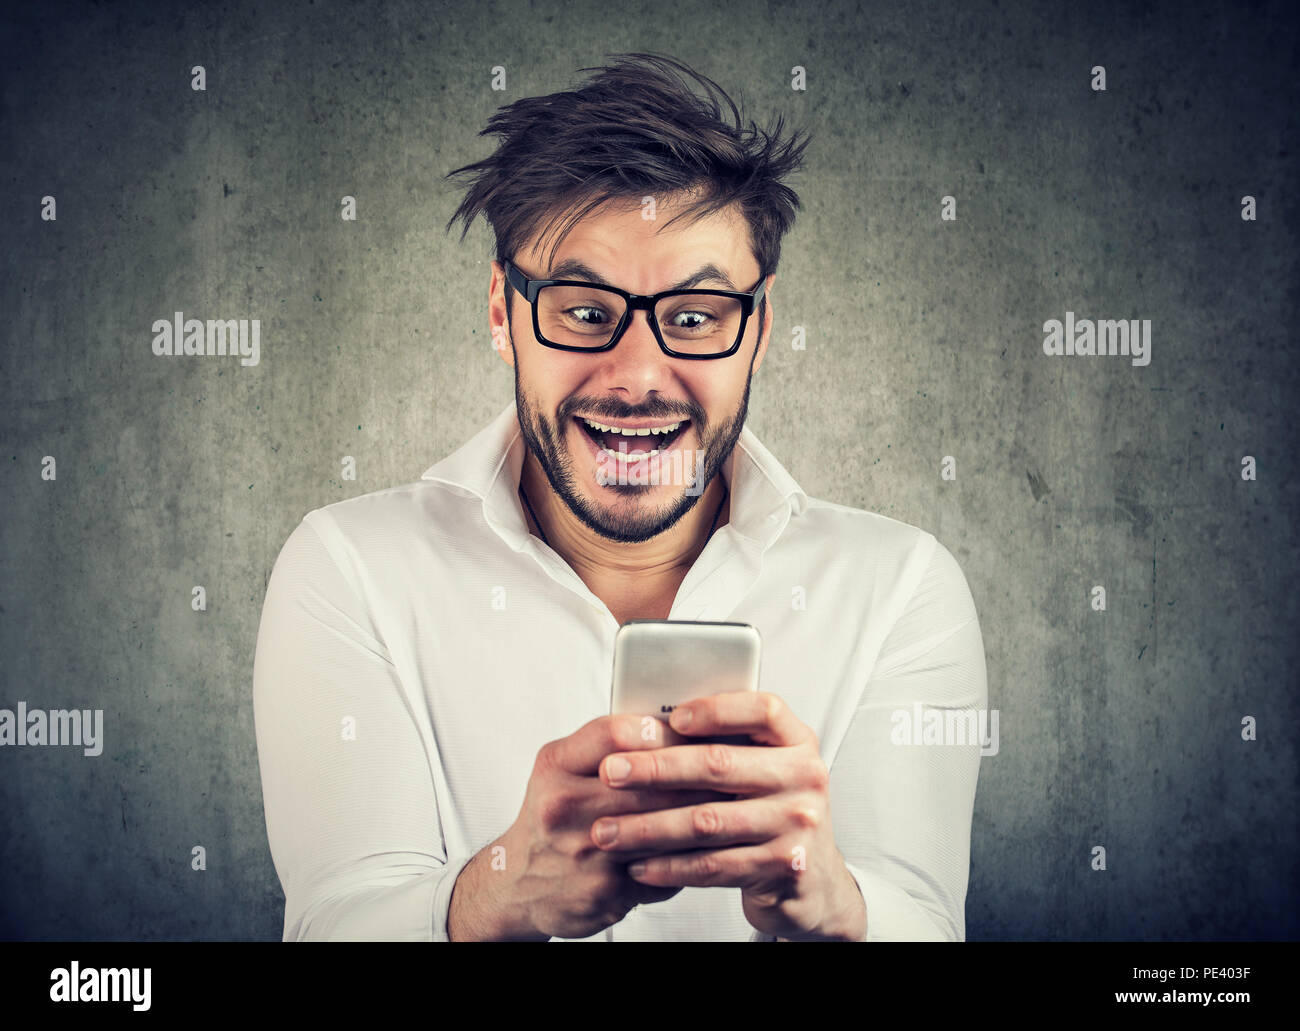 Thrilled and crazily looking young man in glasses and shirt watching news on smartphone standing against gray background Stock Photo